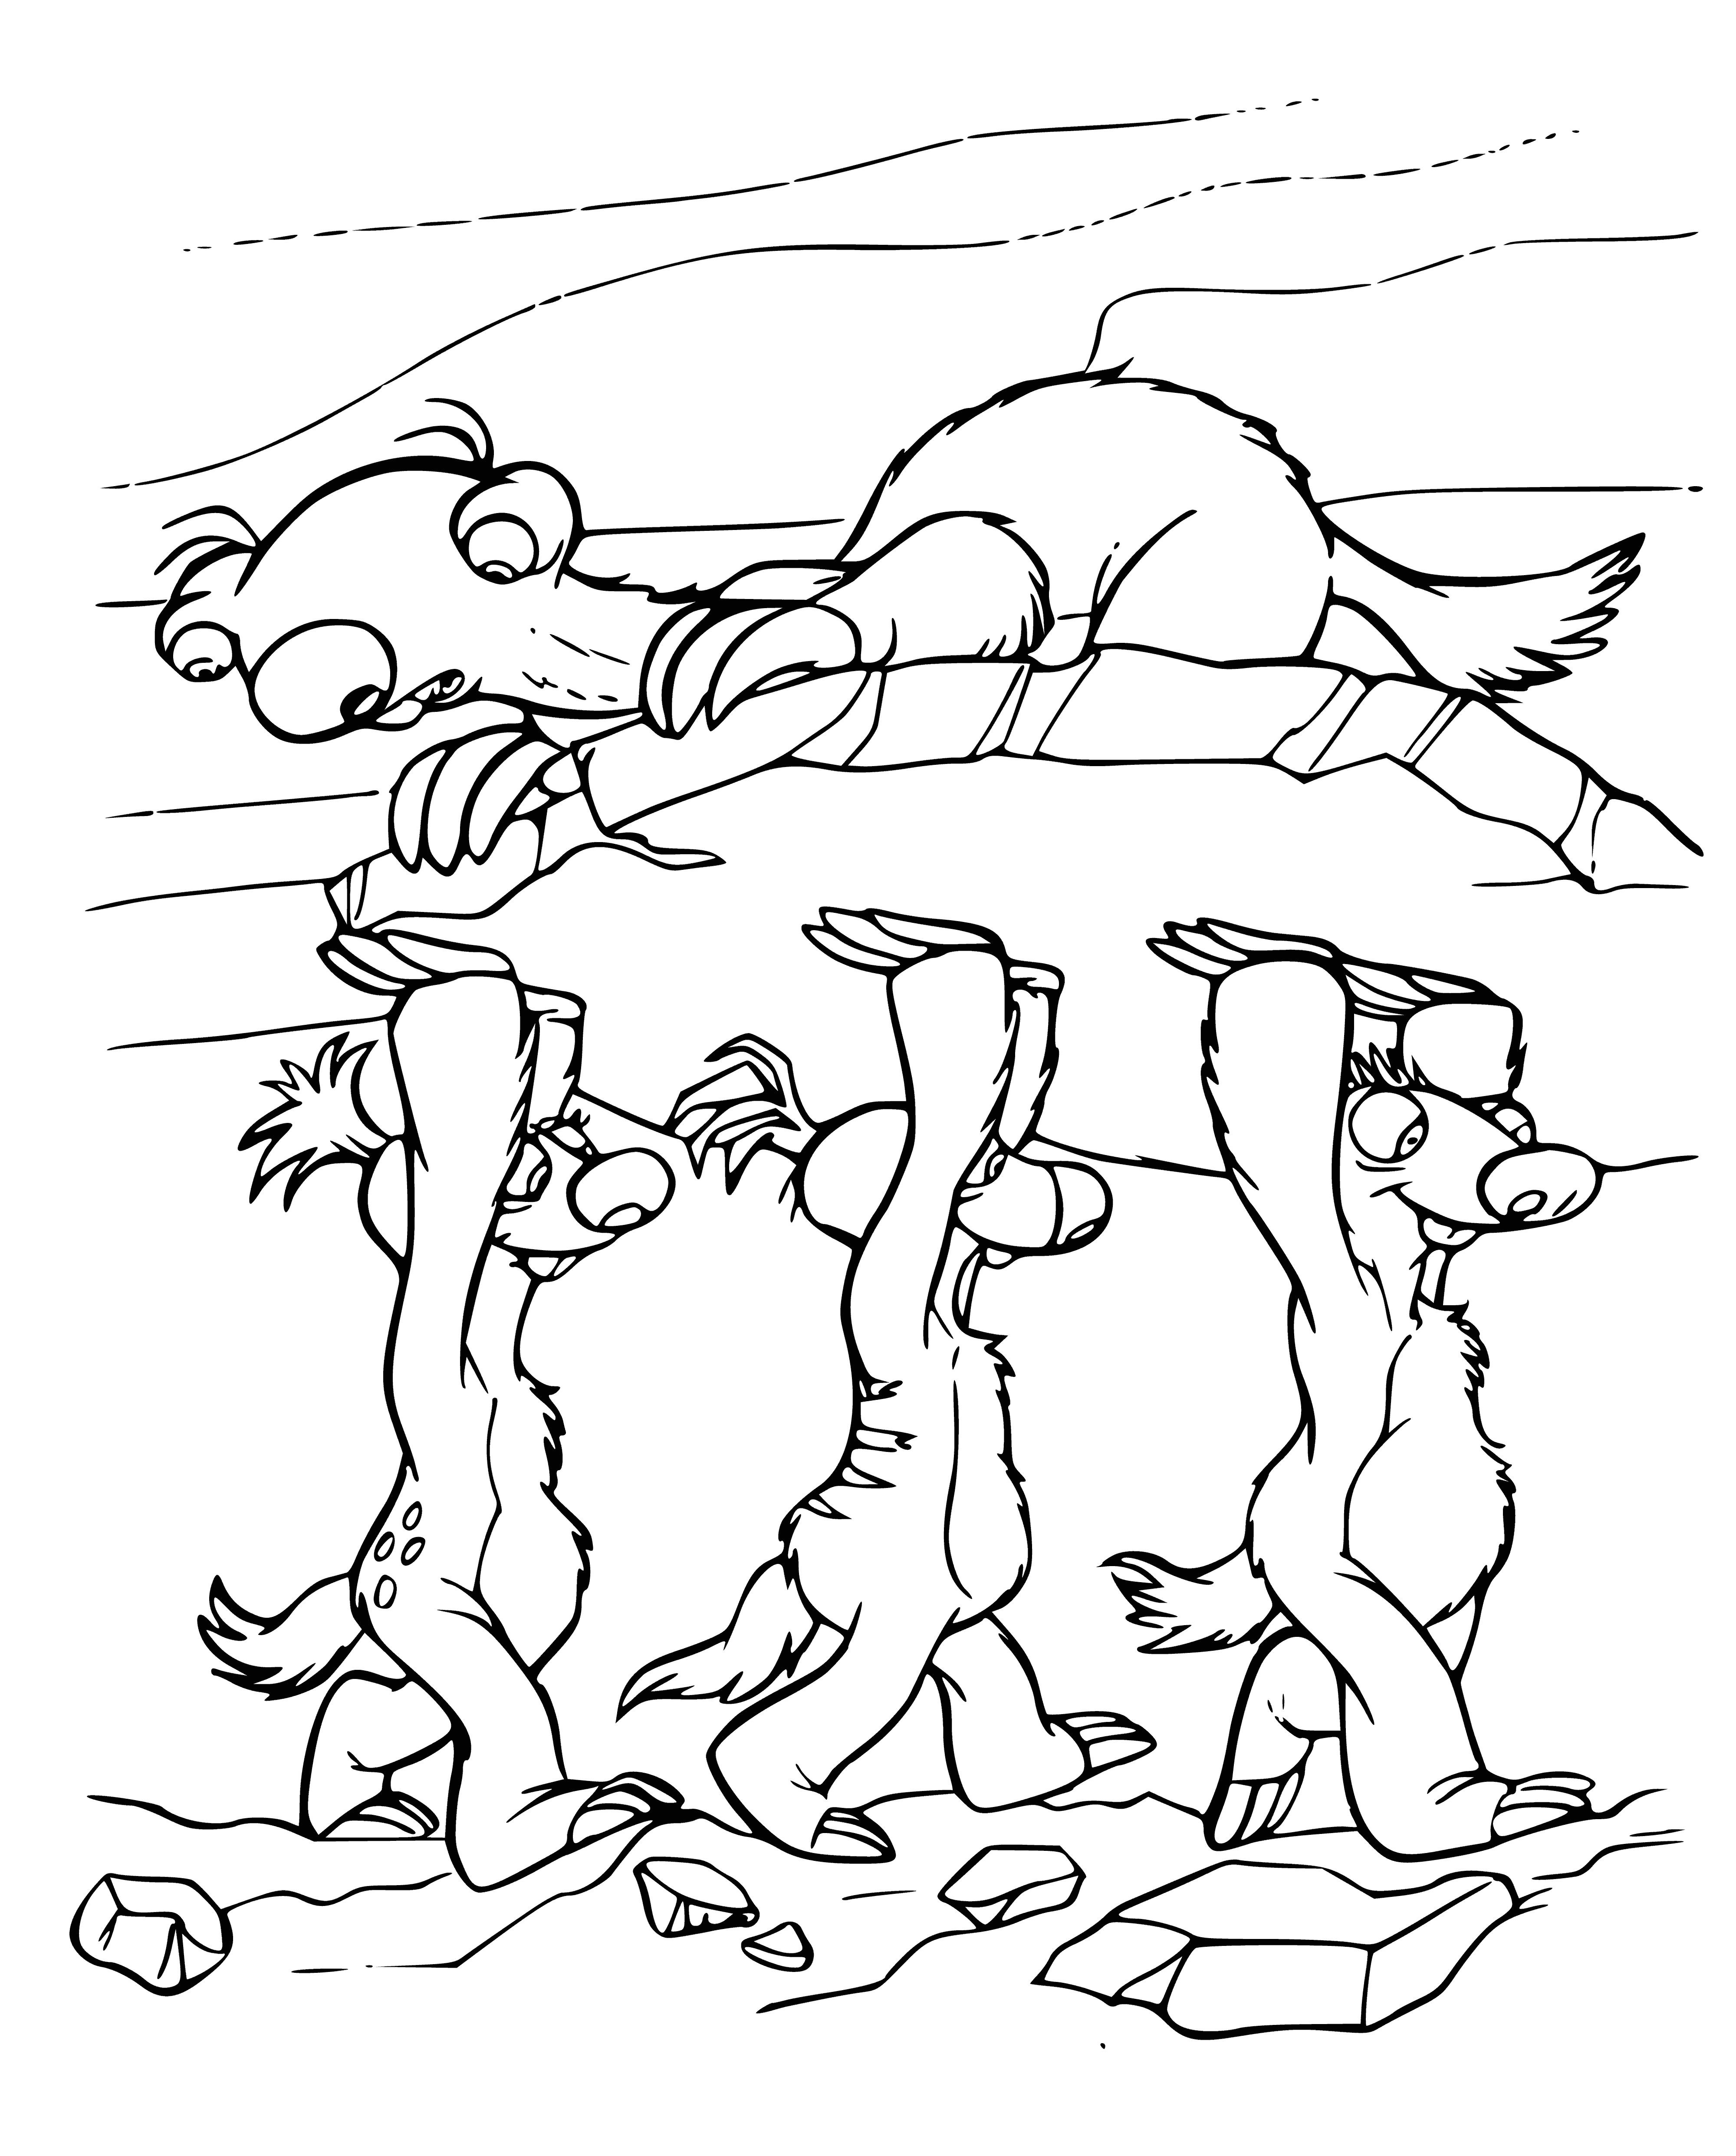 coloring page: Rabbit in center of page with kids looking up adoringly. Holding a sphere on ice, surrounded by icy mountains in background.